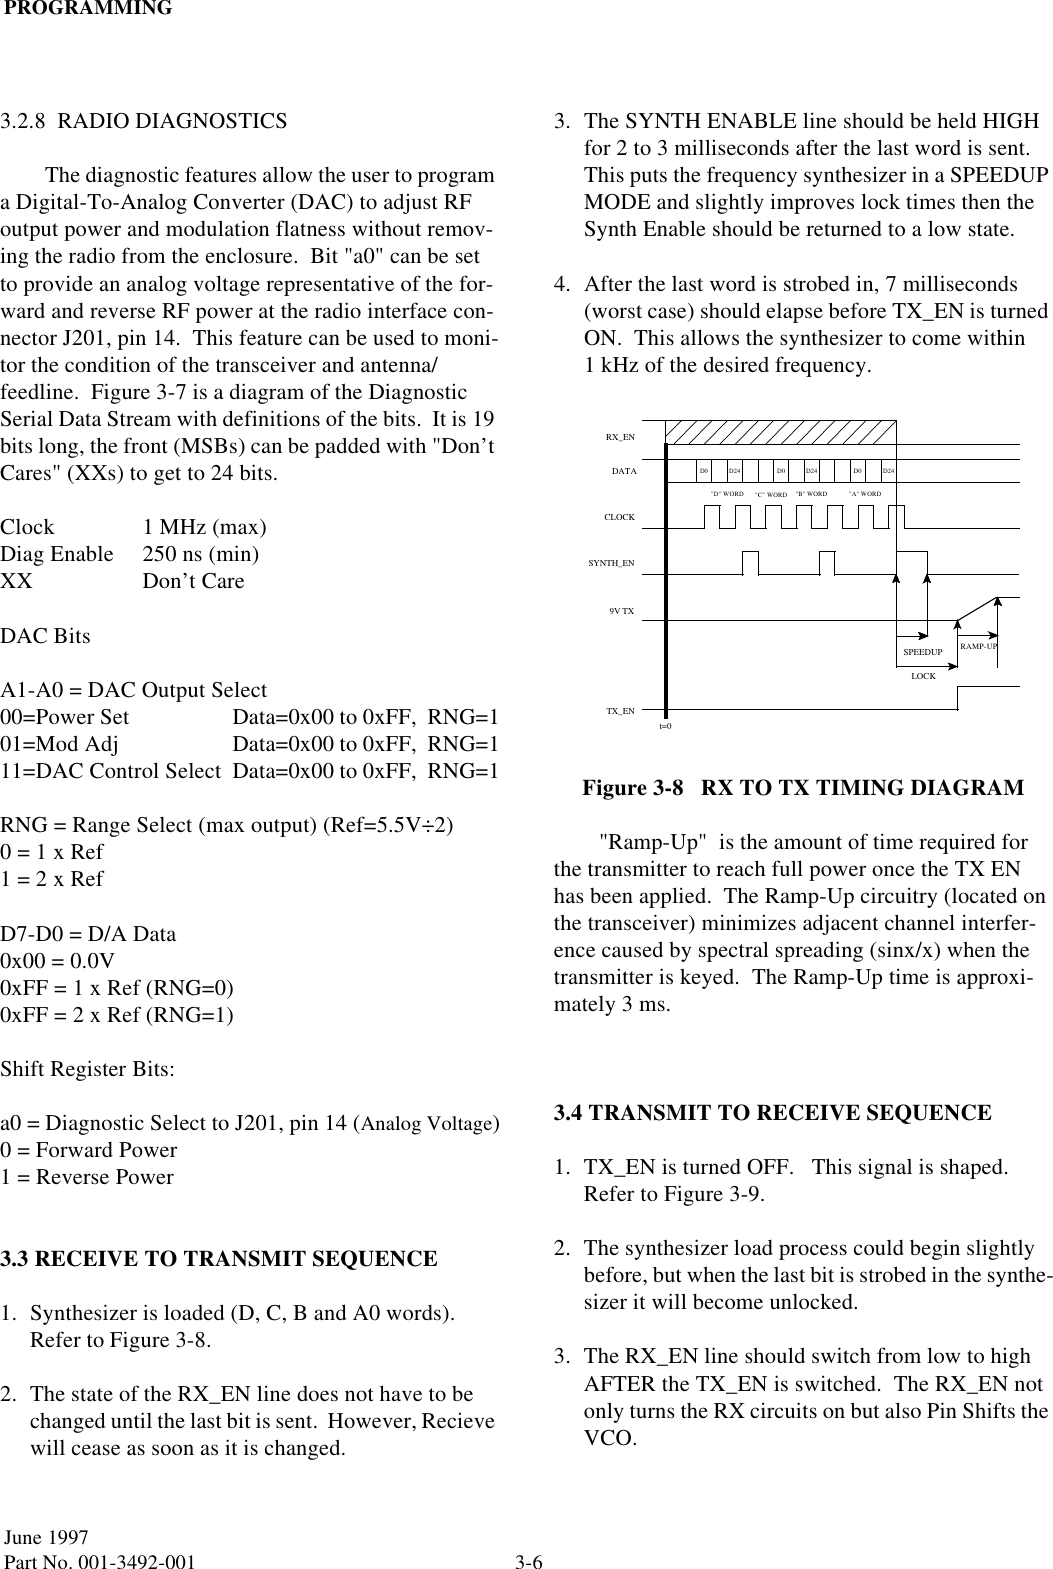 PROGRAMMING3-6June 1997Part No. 001-3492-0013.2.8  RADIO DIAGNOSTICSThe diagnostic features allow the user to program a Digital-To-Analog Converter (DAC) to adjust RF output power and modulation flatness without remov-ing the radio from the enclosure.  Bit &quot;a0&quot; can be set to provide an analog voltage representative of the for-ward and reverse RF power at the radio interface con-nector J201, pin 14.  This feature can be used to moni-tor the condition of the transceiver and antenna/feedline.  Figure 3-7 is a diagram of the Diagnostic Serial Data Stream with definitions of the bits.  It is 19 bits long, the front (MSBs) can be padded with &quot;Don’t Cares&quot; (XXs) to get to 24 bits.Clock 1 MHz (max)Diag Enable 250 ns (min)XX Don’t CareDAC BitsA1-A0 = DAC Output Select00=Power Set Data=0x00 to 0xFF,  RNG=101=Mod Adj Data=0x00 to 0xFF,  RNG=111=DAC Control Select Data=0x00 to 0xFF,  RNG=1RNG = Range Select (max output) (Ref=5.5V÷2)0 = 1 x Ref1 = 2 x RefD7-D0 = D/A Data0x00 = 0.0V0xFF = 1 x Ref (RNG=0)0xFF = 2 x Ref (RNG=1)Shift Register Bits:a0 = Diagnostic Select to J201, pin 14 (Analog Voltage)0 = Forward Power1 = Reverse Power3.3 RECEIVE TO TRANSMIT SEQUENCE1. Synthesizer is loaded (D, C, B and A0 words).  Refer to Figure 3-8.2. The state of the RX_EN line does not have to be changed until the last bit is sent.  However, Recieve will cease as soon as it is changed.3. The SYNTH ENABLE line should be held HIGH for 2 to 3 milliseconds after the last word is sent.  This puts the frequency synthesizer in a SPEEDUP MODE and slightly improves lock times then the Synth Enable should be returned to a low state.4. After the last word is strobed in, 7 milliseconds (worst case) should elapse before TX_EN is turned ON.  This allows the synthesizer to come within 1 kHz of the desired frequency.Figure 3-8   RX TO TX TIMING DIAGRAM&quot;Ramp-Up&quot;  is the amount of time required for the transmitter to reach full power once the TX EN has been applied.  The Ramp-Up circuitry (located on the transceiver) minimizes adjacent channel interfer-ence caused by spectral spreading (sinx/x) when the transmitter is keyed.  The Ramp-Up time is approxi-mately 3 ms.3.4 TRANSMIT TO RECEIVE SEQUENCE1. TX_EN is turned OFF.   This signal is shaped.  Refer to Figure 3-9.2. The synthesizer load process could begin slightly before, but when the last bit is strobed in the synthe-sizer it will become unlocked.3. The RX_EN line should switch from low to high AFTER the TX_EN is switched.  The RX_EN not only turns the RX circuits on but also Pin Shifts the VCO.D0D24D0 D24 D0 D24&quot;D&quot; WORD &quot;B&quot; WORD &quot;A&quot; WORDDATACLOCKt=0SPEEDUP RAMP-UPLOCKRX_ENSYNTH_EN9V TXTX_EN&quot;C&quot; WORD